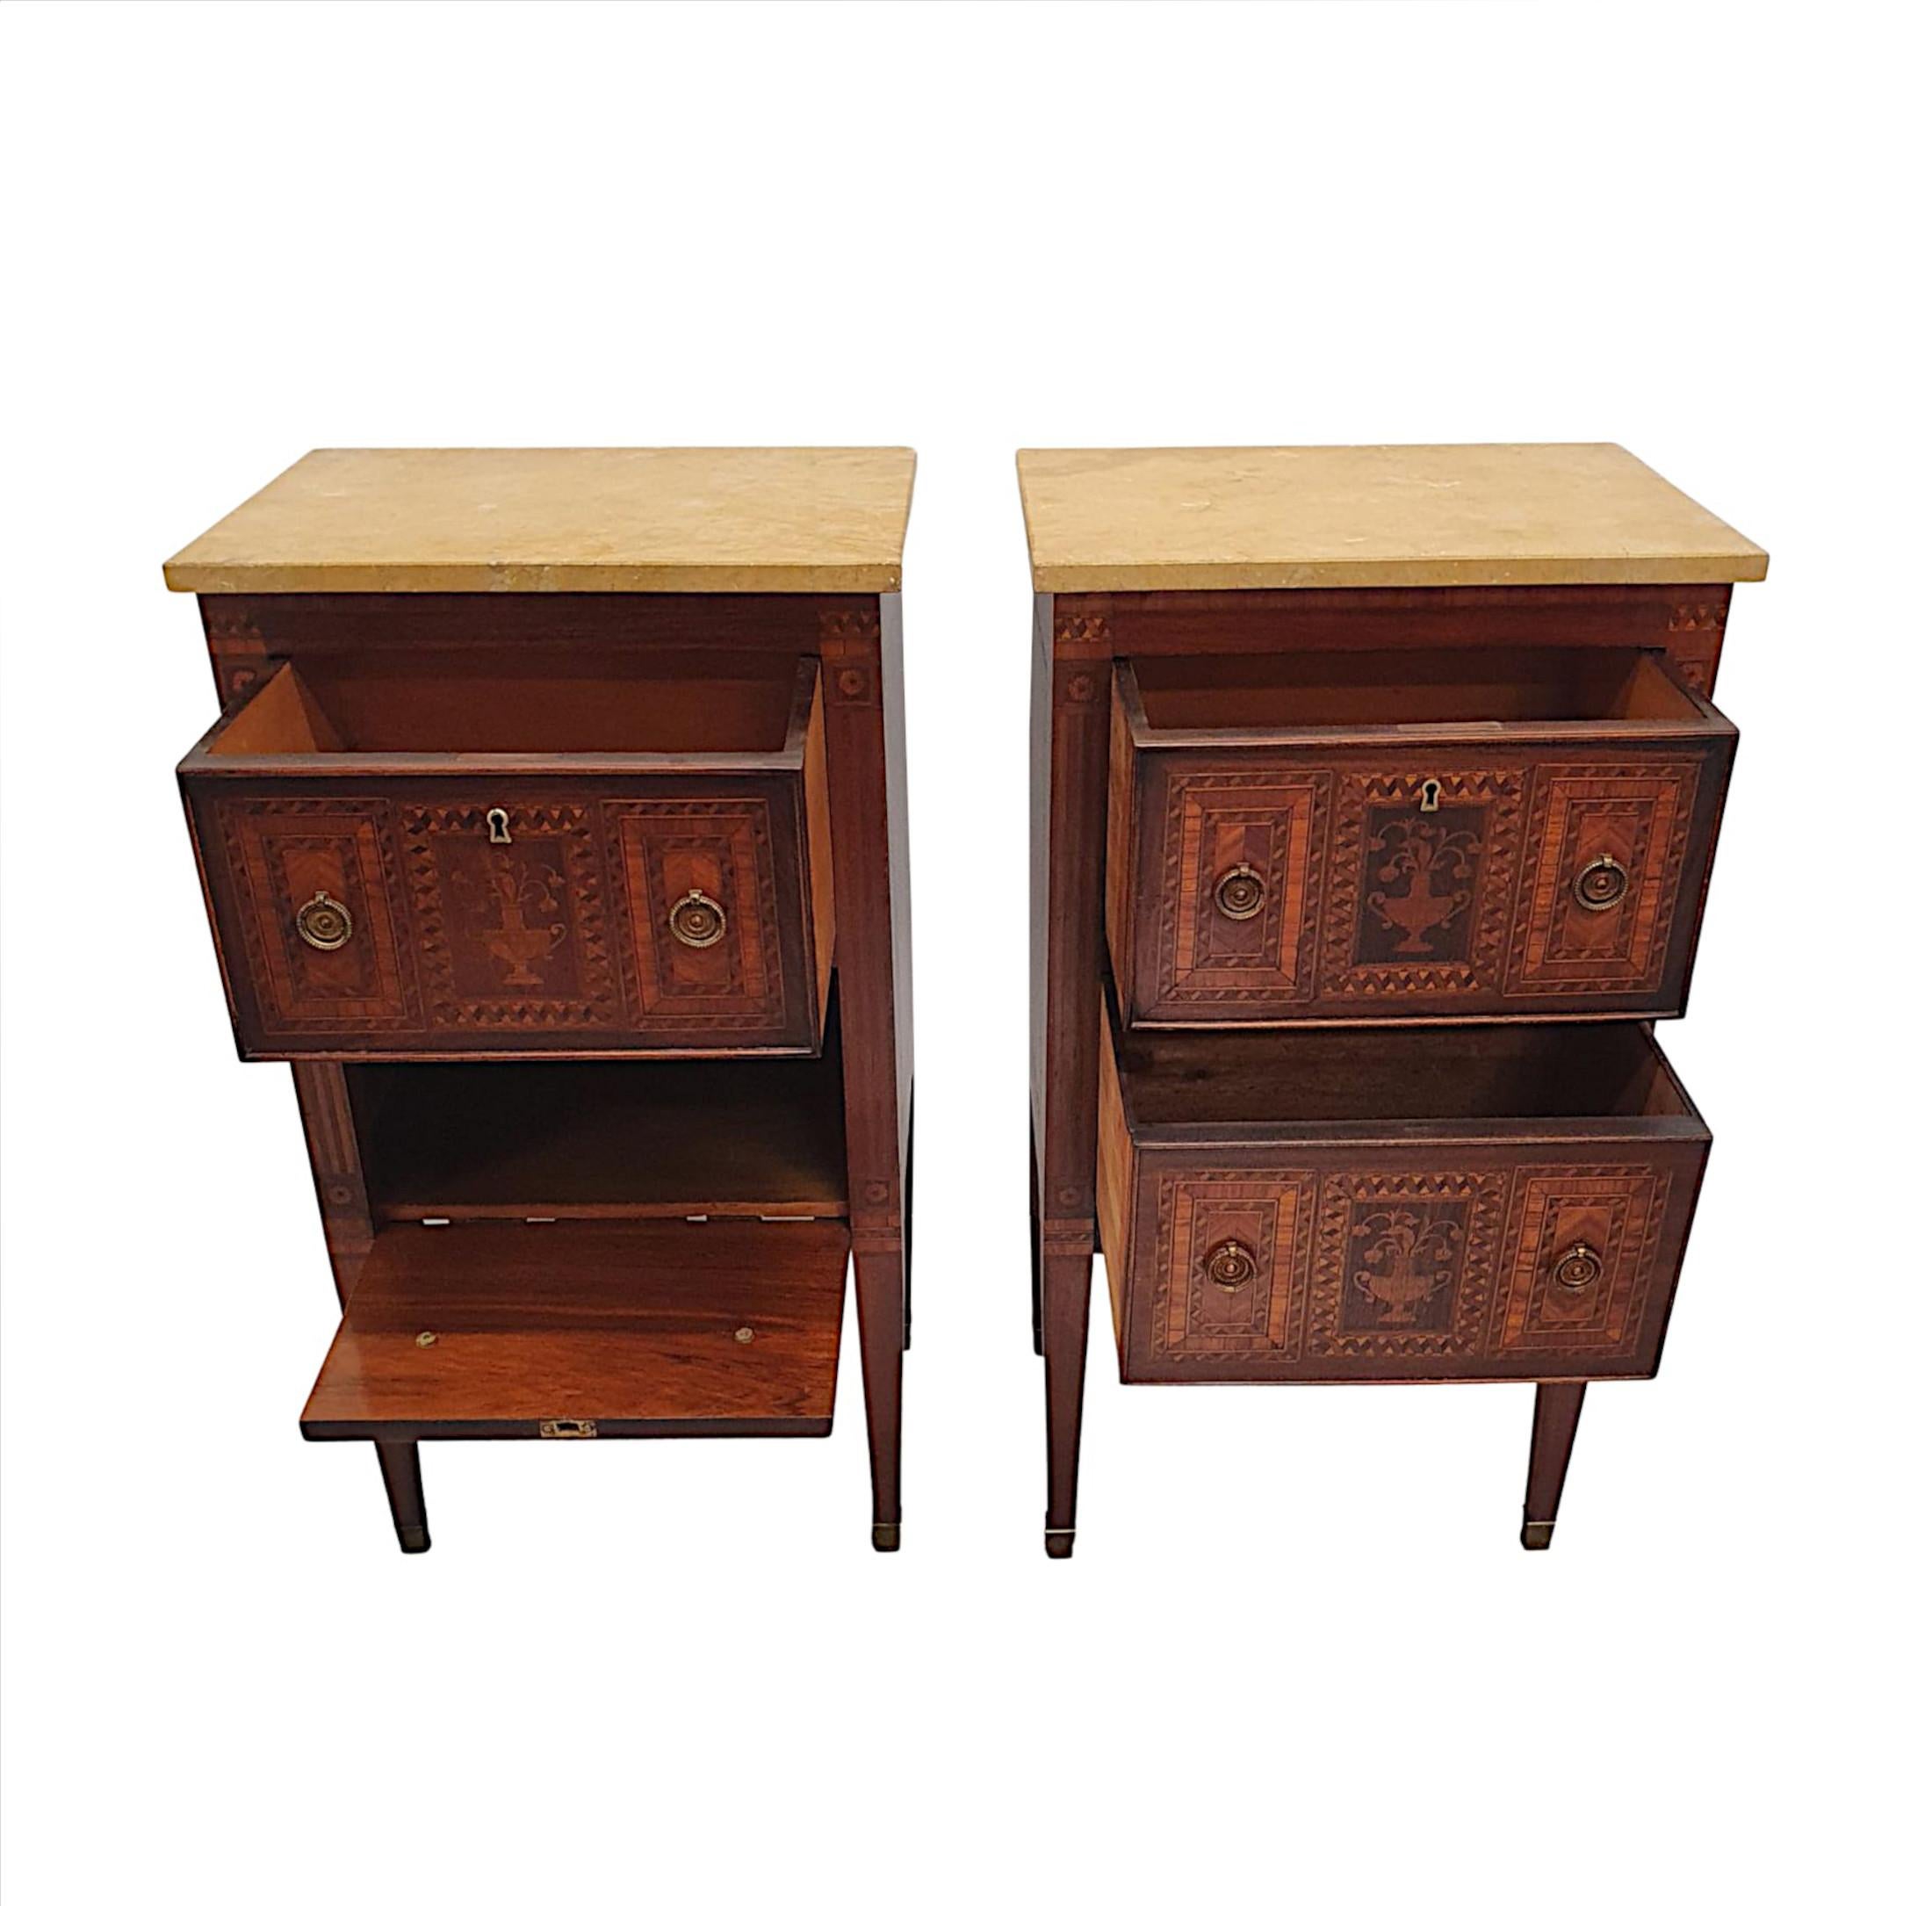 Brass A Fine Pair of Early 20th Century Highly Inlaid Marble Top Bedside Chests For Sale